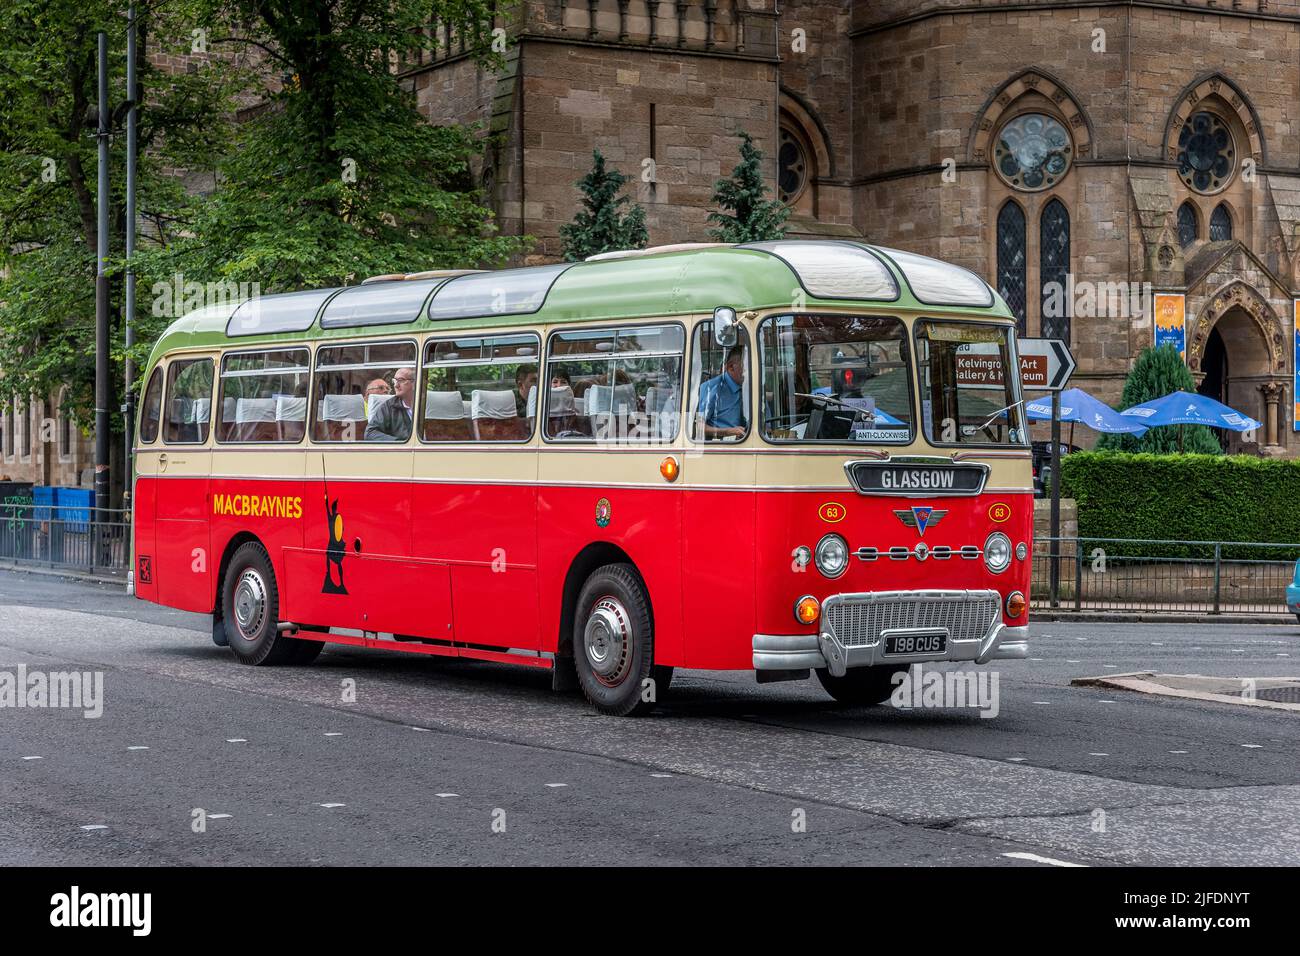 1961 AEC Reliance Coach in the Livery of MacBraynes seen the West End of Glasgow heading up Great Western Road June 2022 Stock Photo